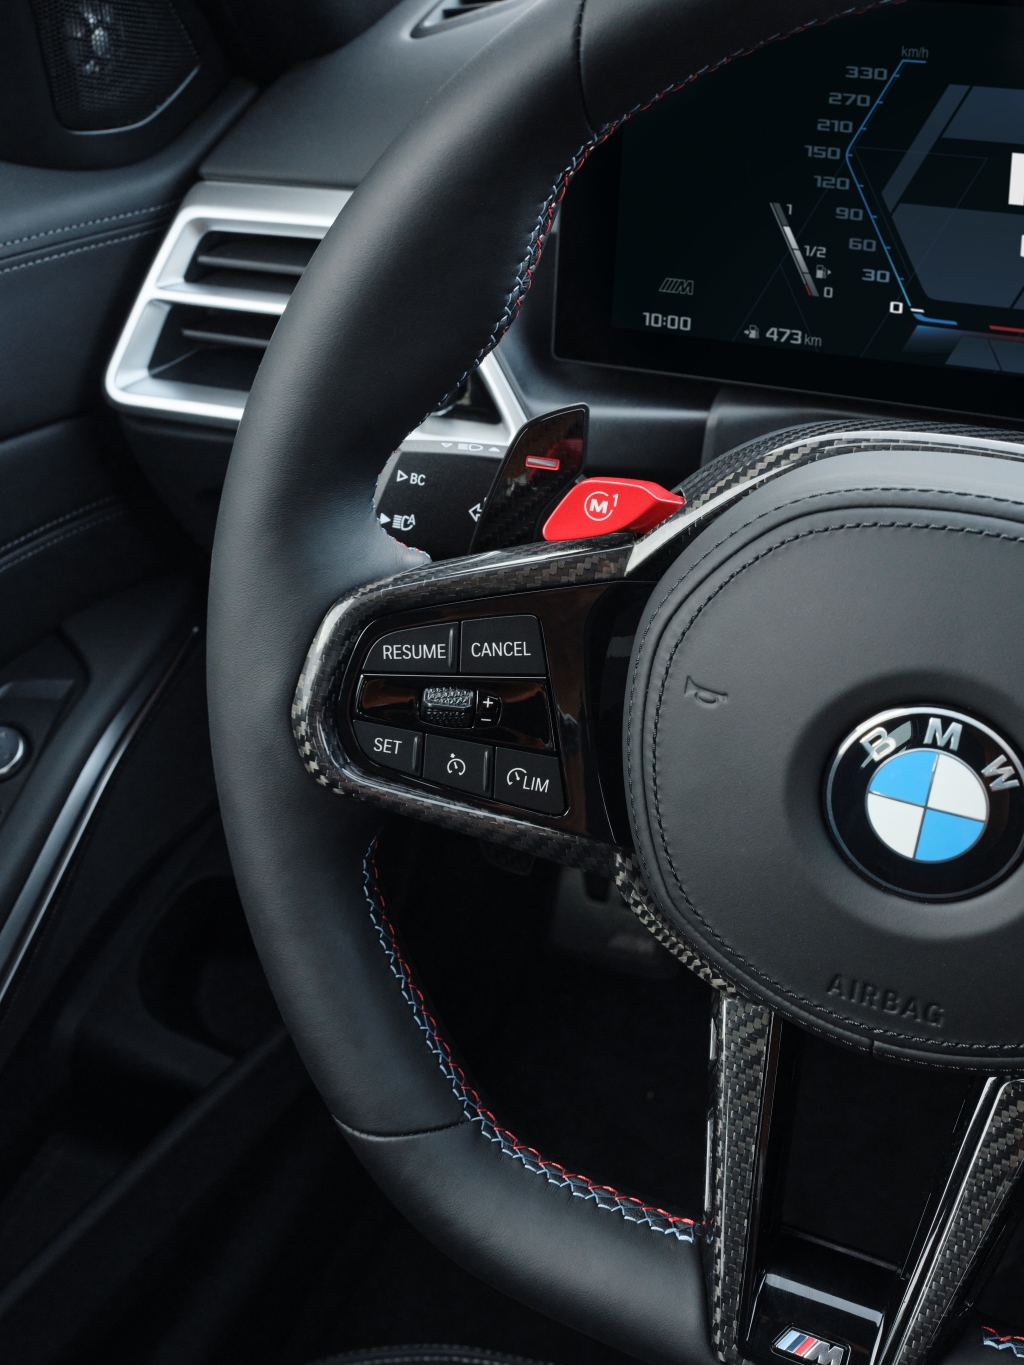 Carbon-fibre inserts in the redesigned steering wheel's spokes set the latest G80/82 BMW M3 Competition apart from its predecessor.